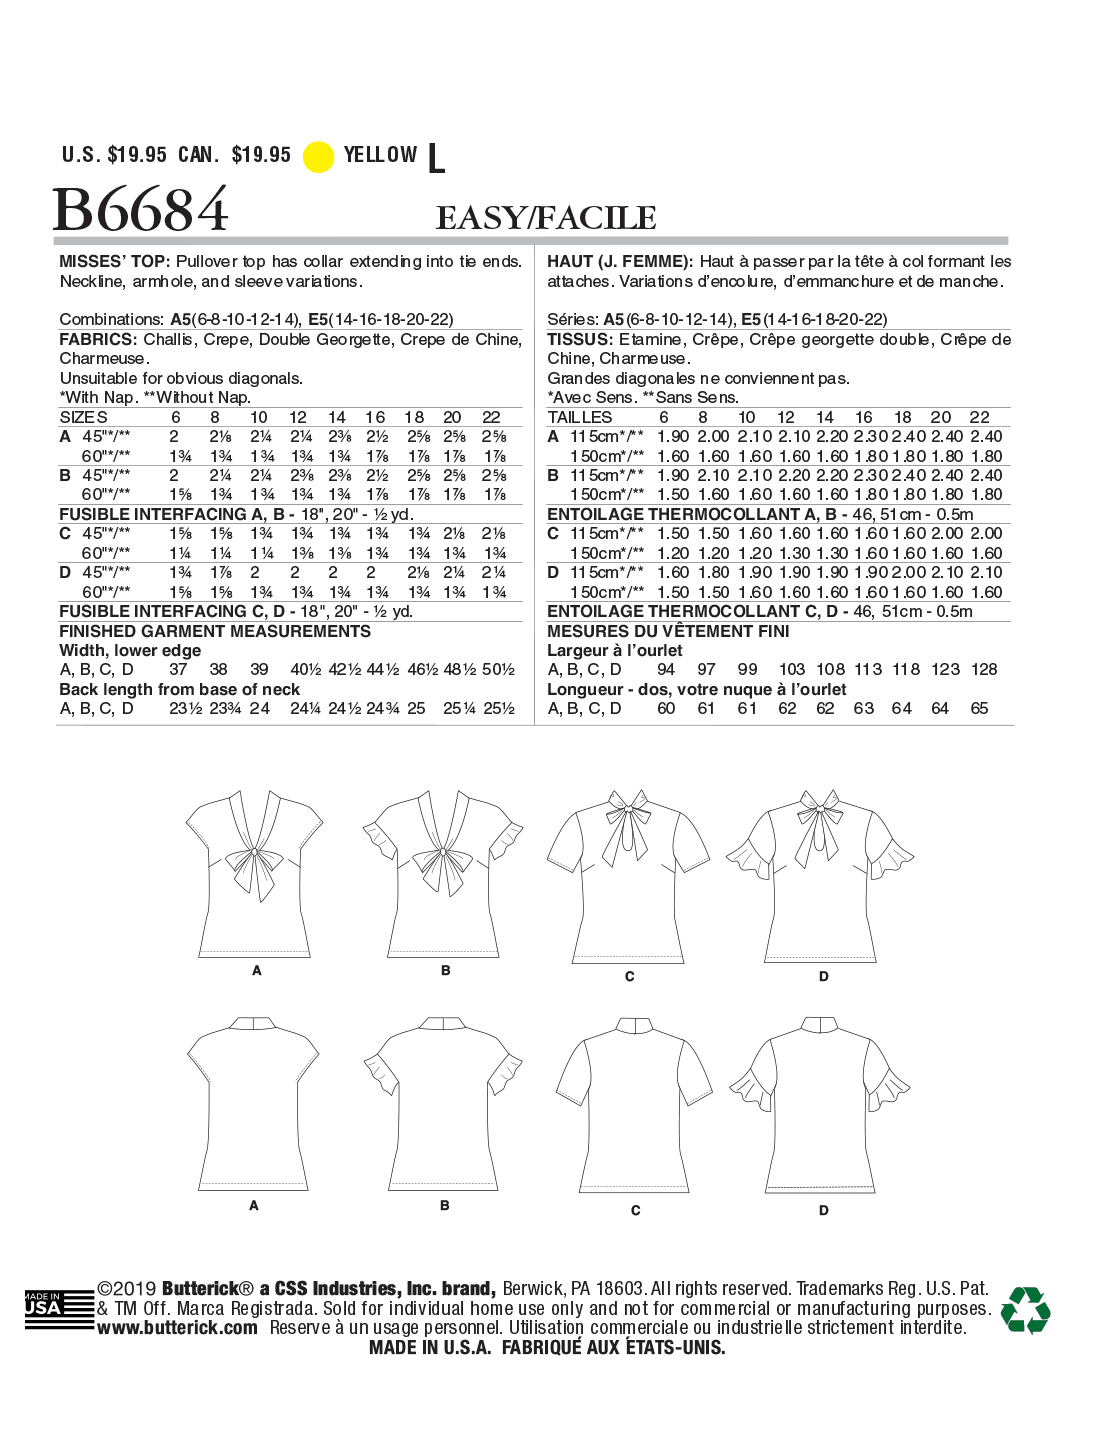 Butterick Sewing Pattern B6684 Misses' Top